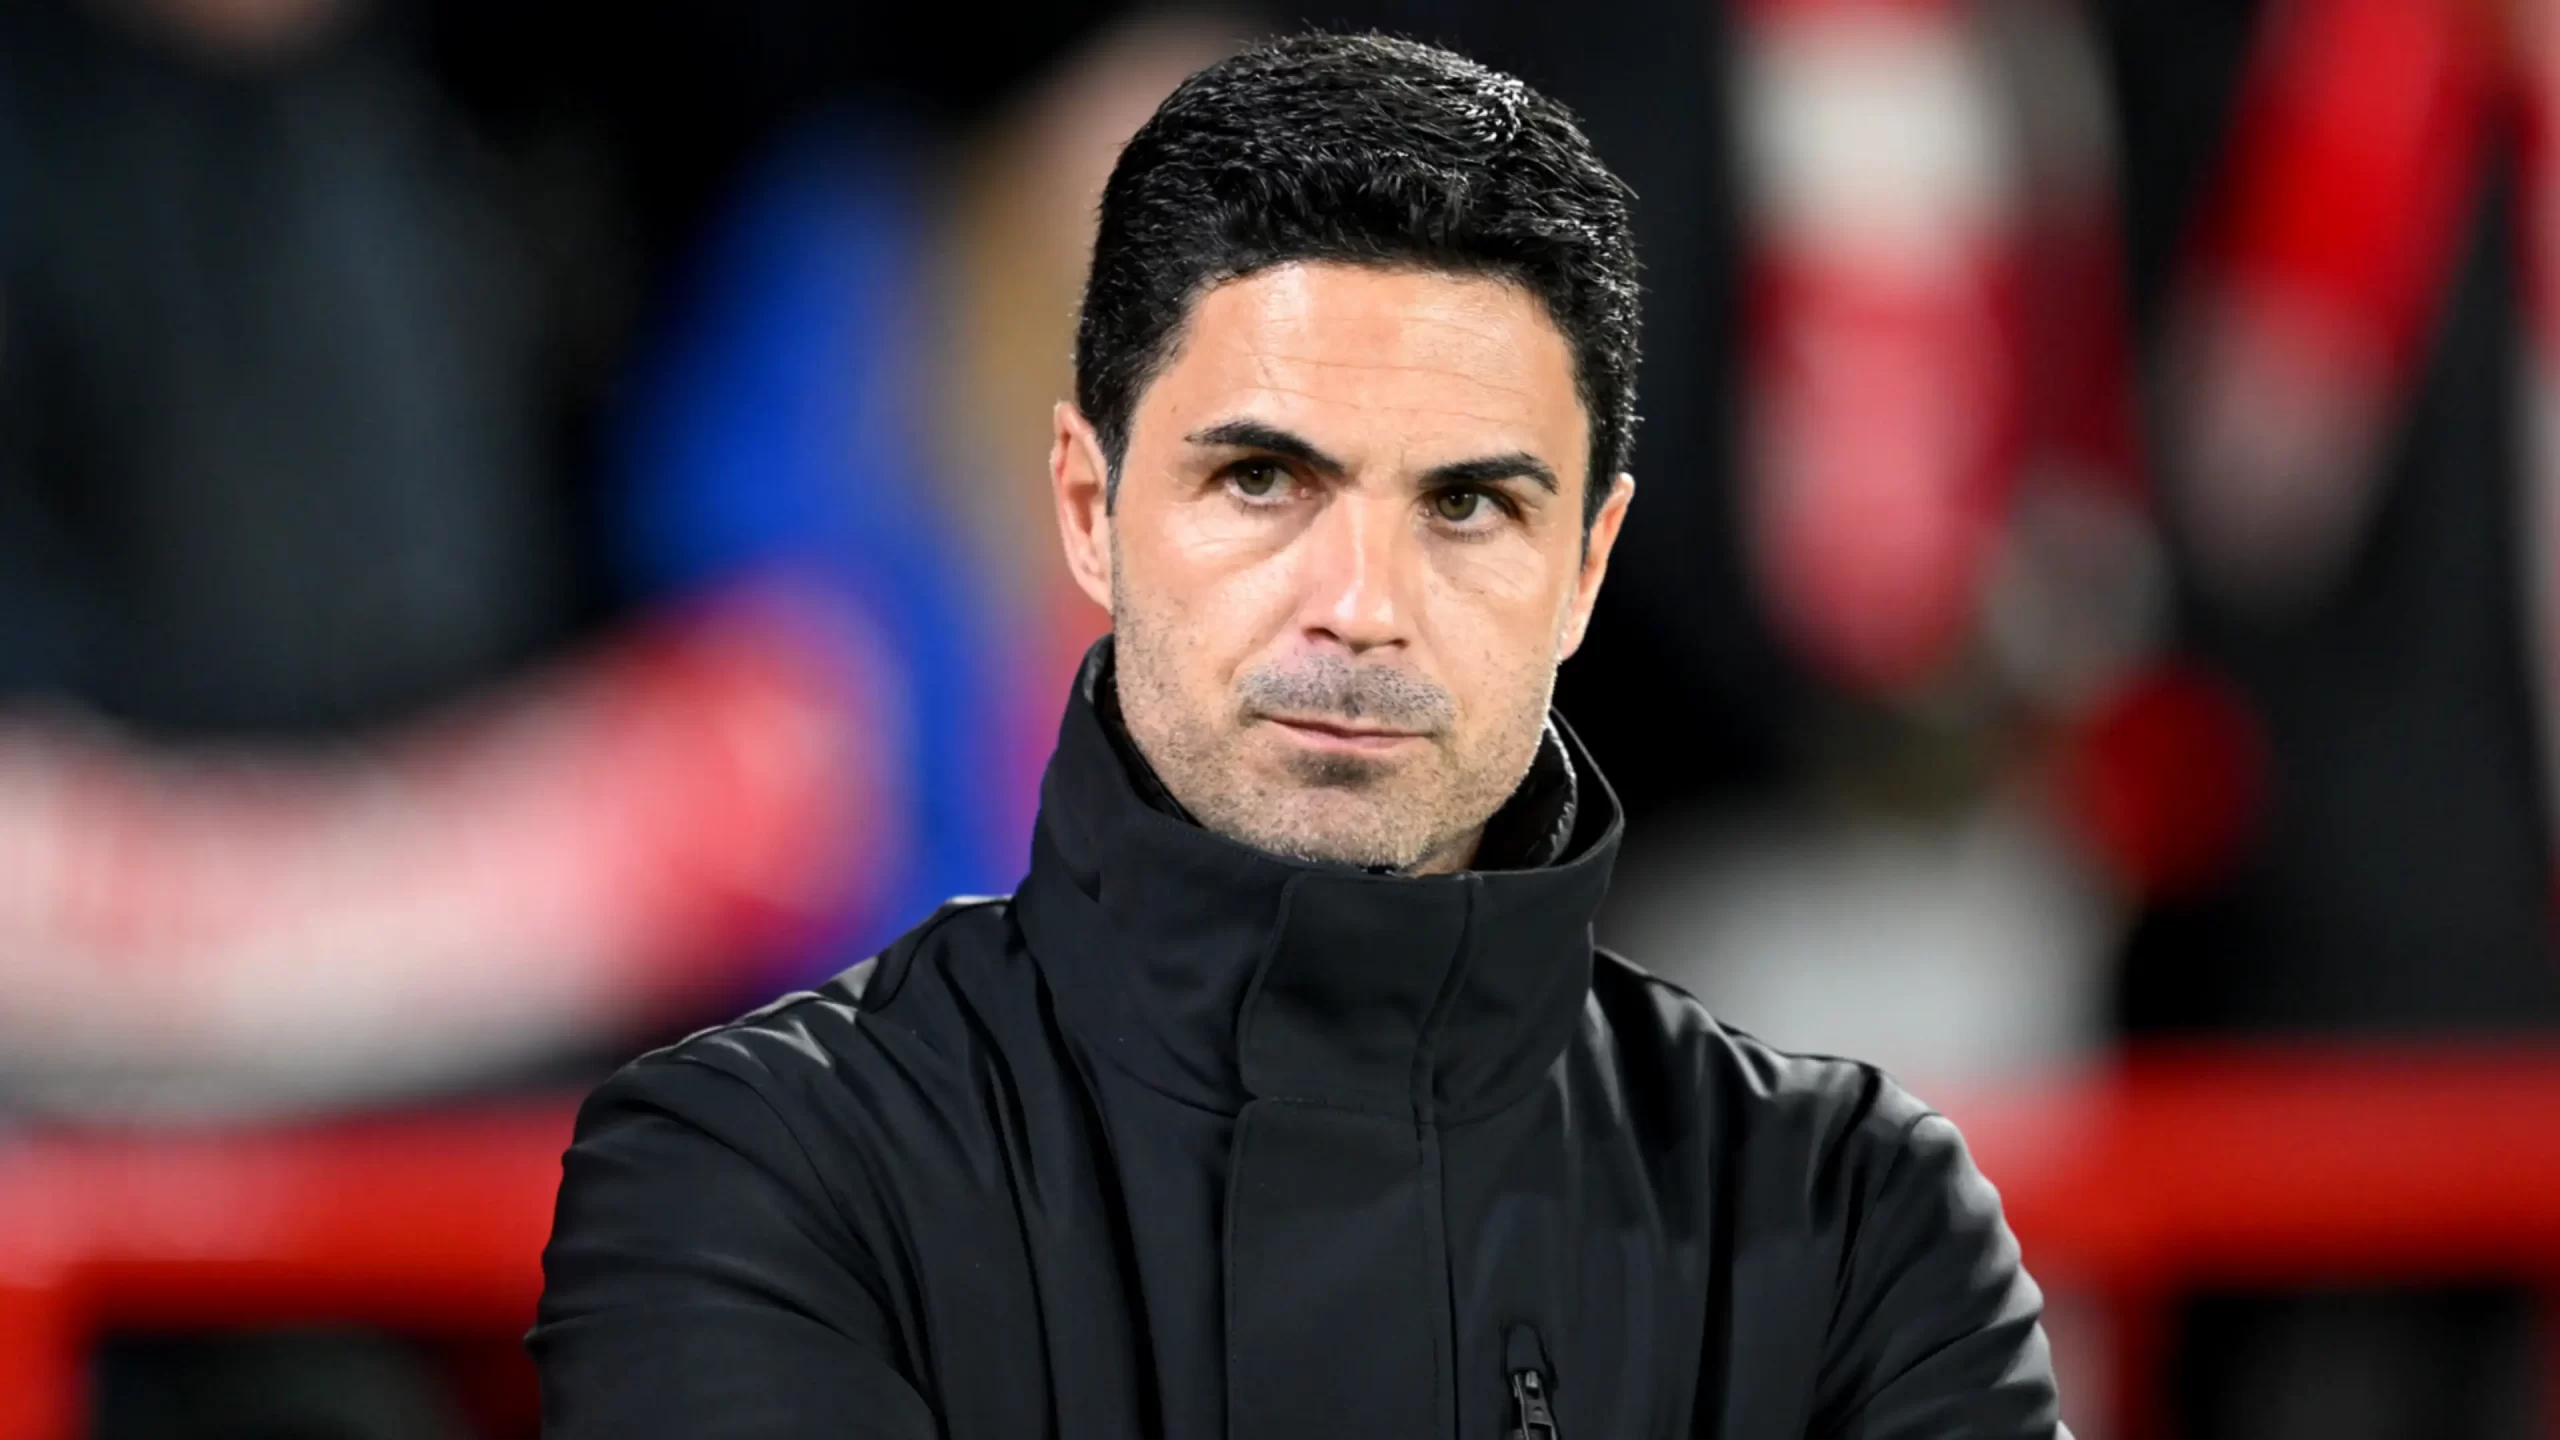 Arsenal: What Arteta can do so wrong against Manchester City